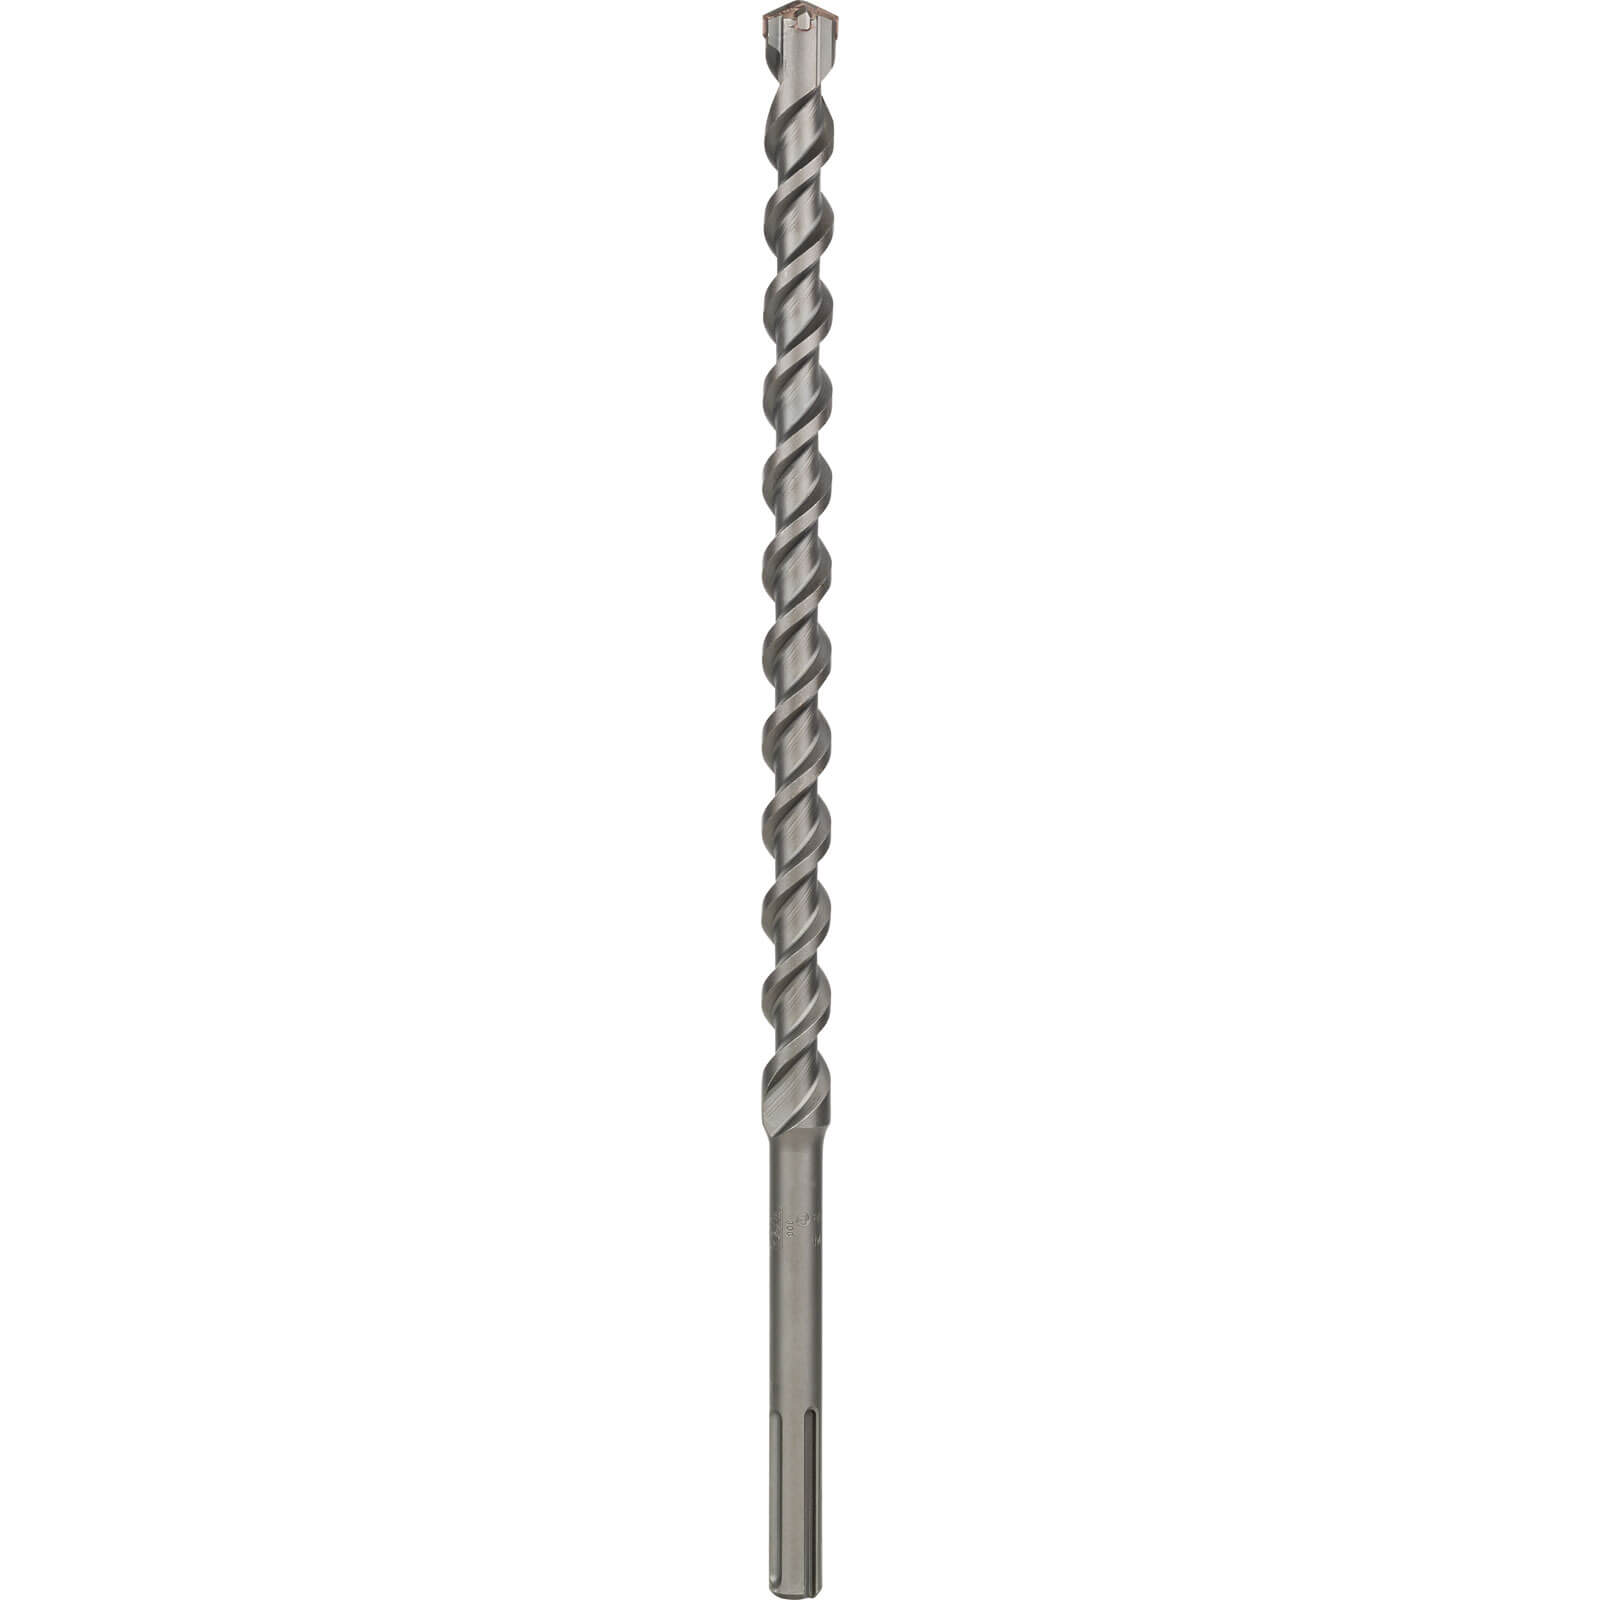 Image of Bosch M4 SDS Max Masonry Drill Bit 25mm 520mm Pack of 1